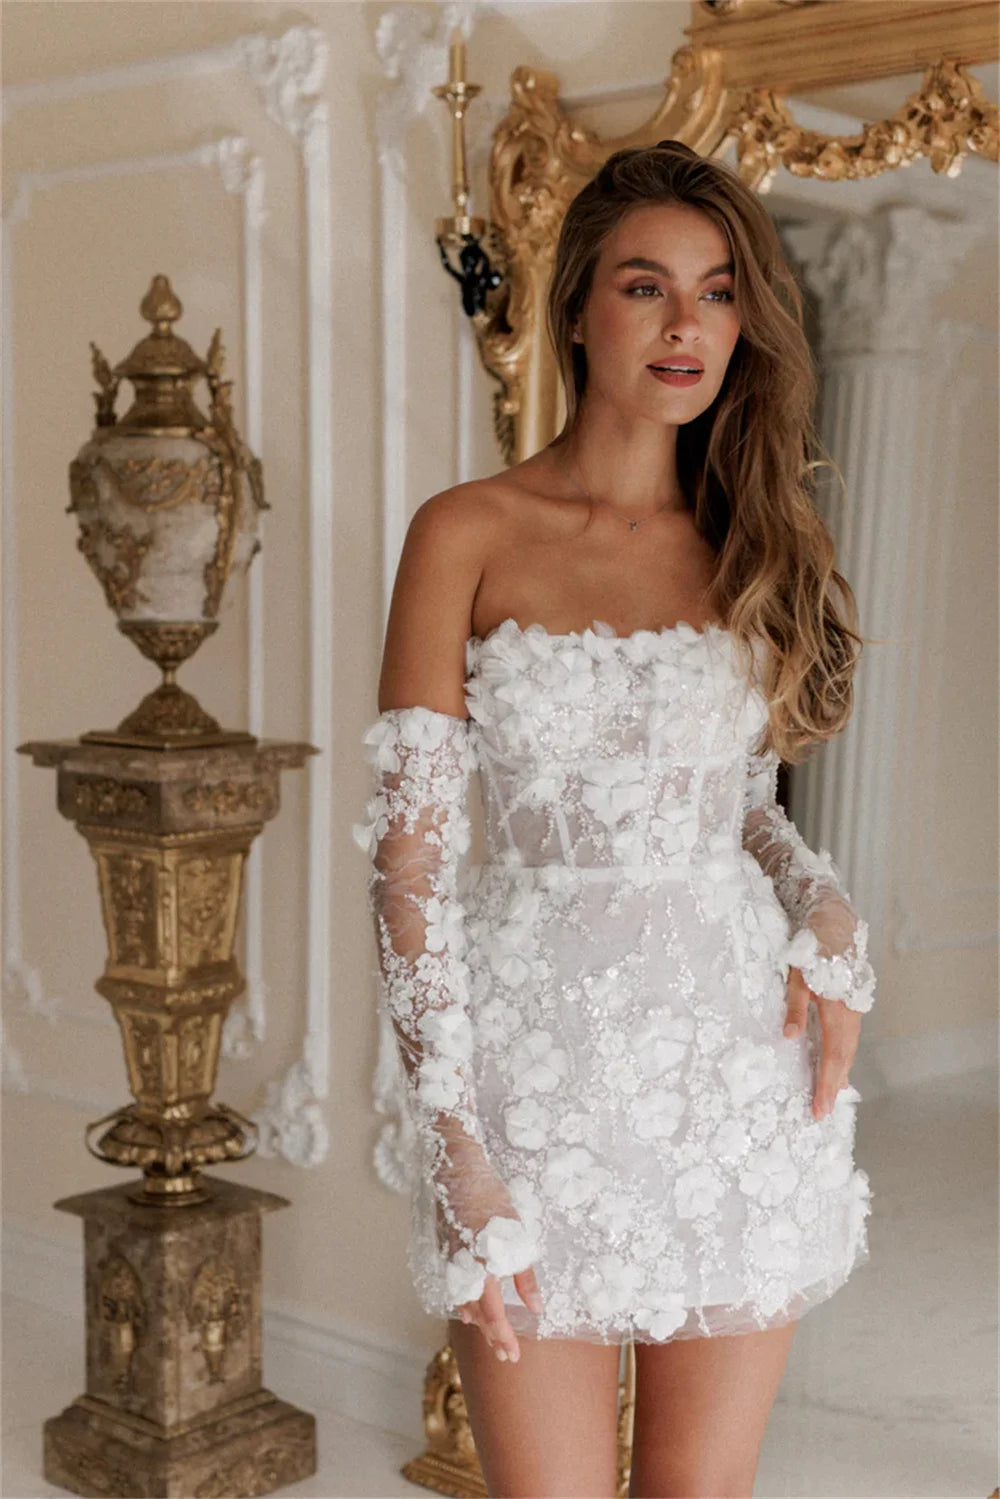 Mini Prom Dresses Flower Lace Embroidery Evening Cocktail Party Wedding Dress Elegant Off Shoulder Detachable Sleeves Dress The Clothing Company Sydney